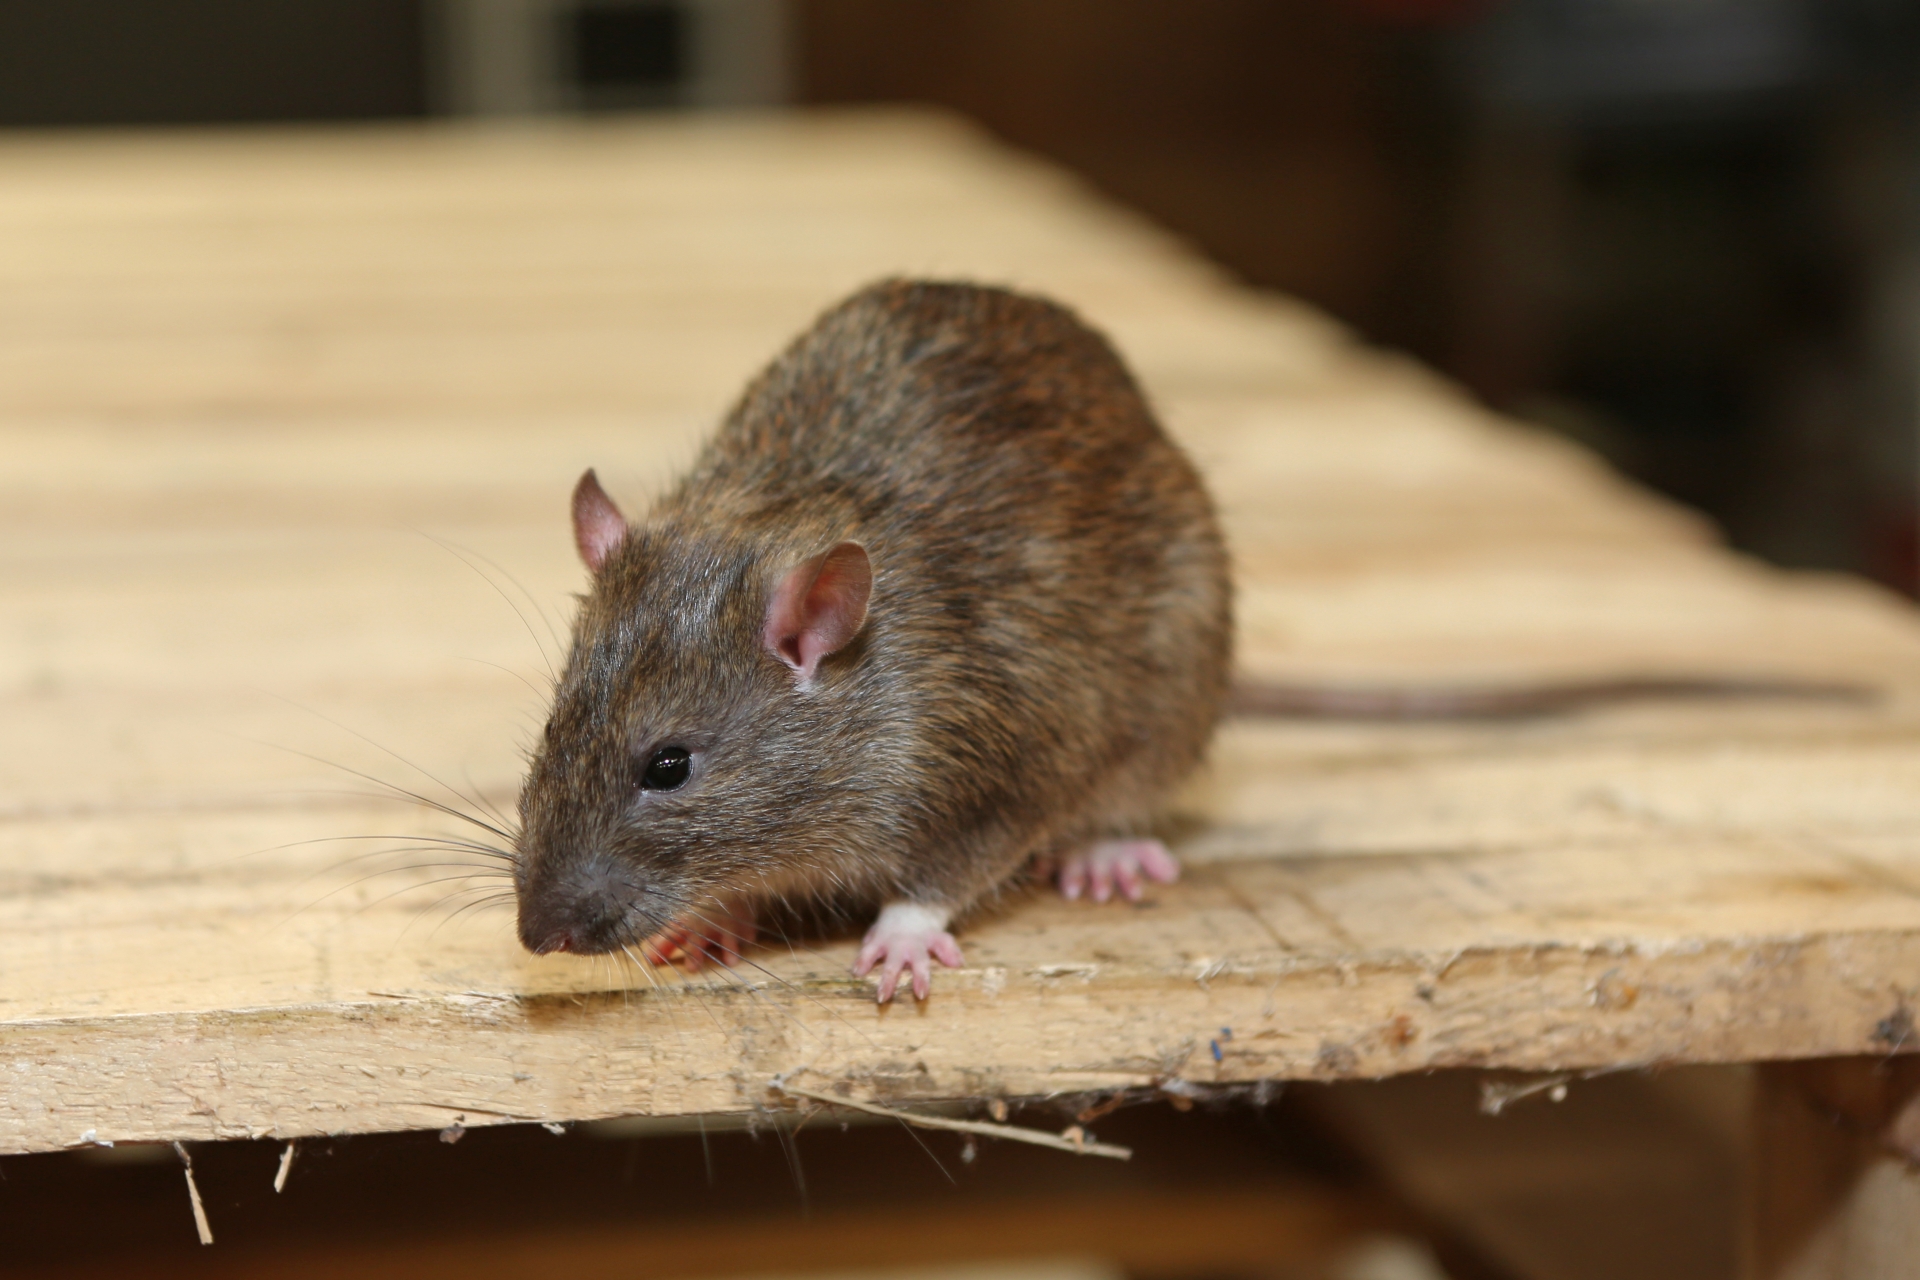 Rat Control, Pest Control in Perivale, UB6. Call Now 020 8166 9746